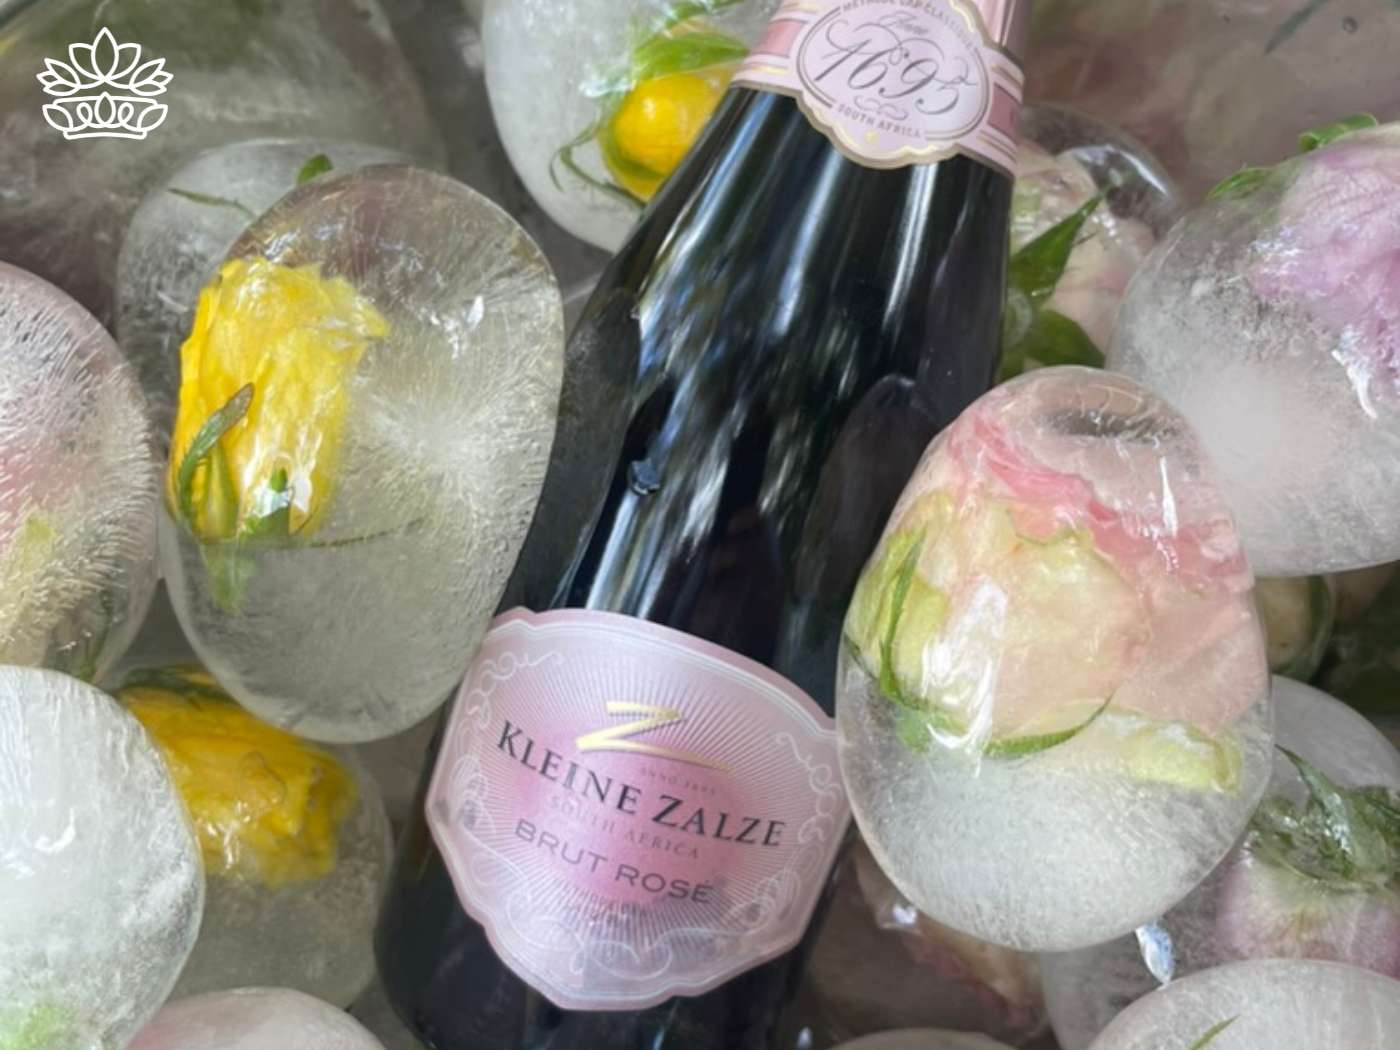 Bottle of Kleine Zalze Brut Rosé wine chilled among floral ice spheres, adding a touch of pink elegance to a traditional Easter basket, from the Easter Collection by Fabulous Flowers and Gifts.